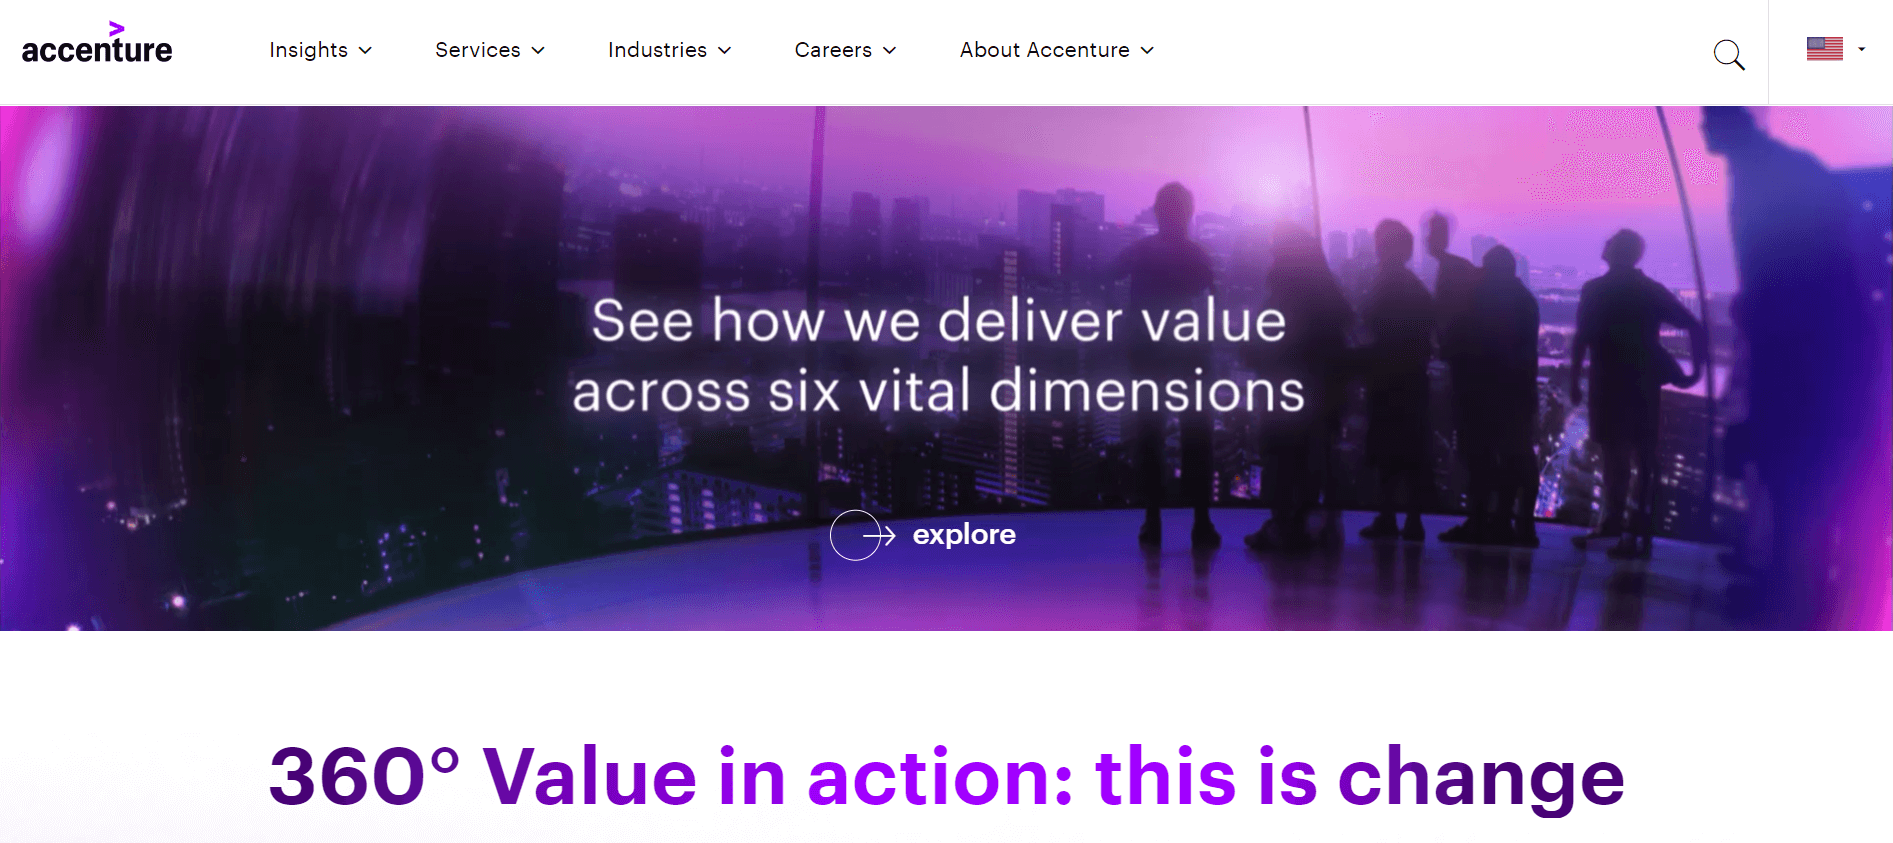 Accenture homepage: See how we deliver value across six vital dimensions